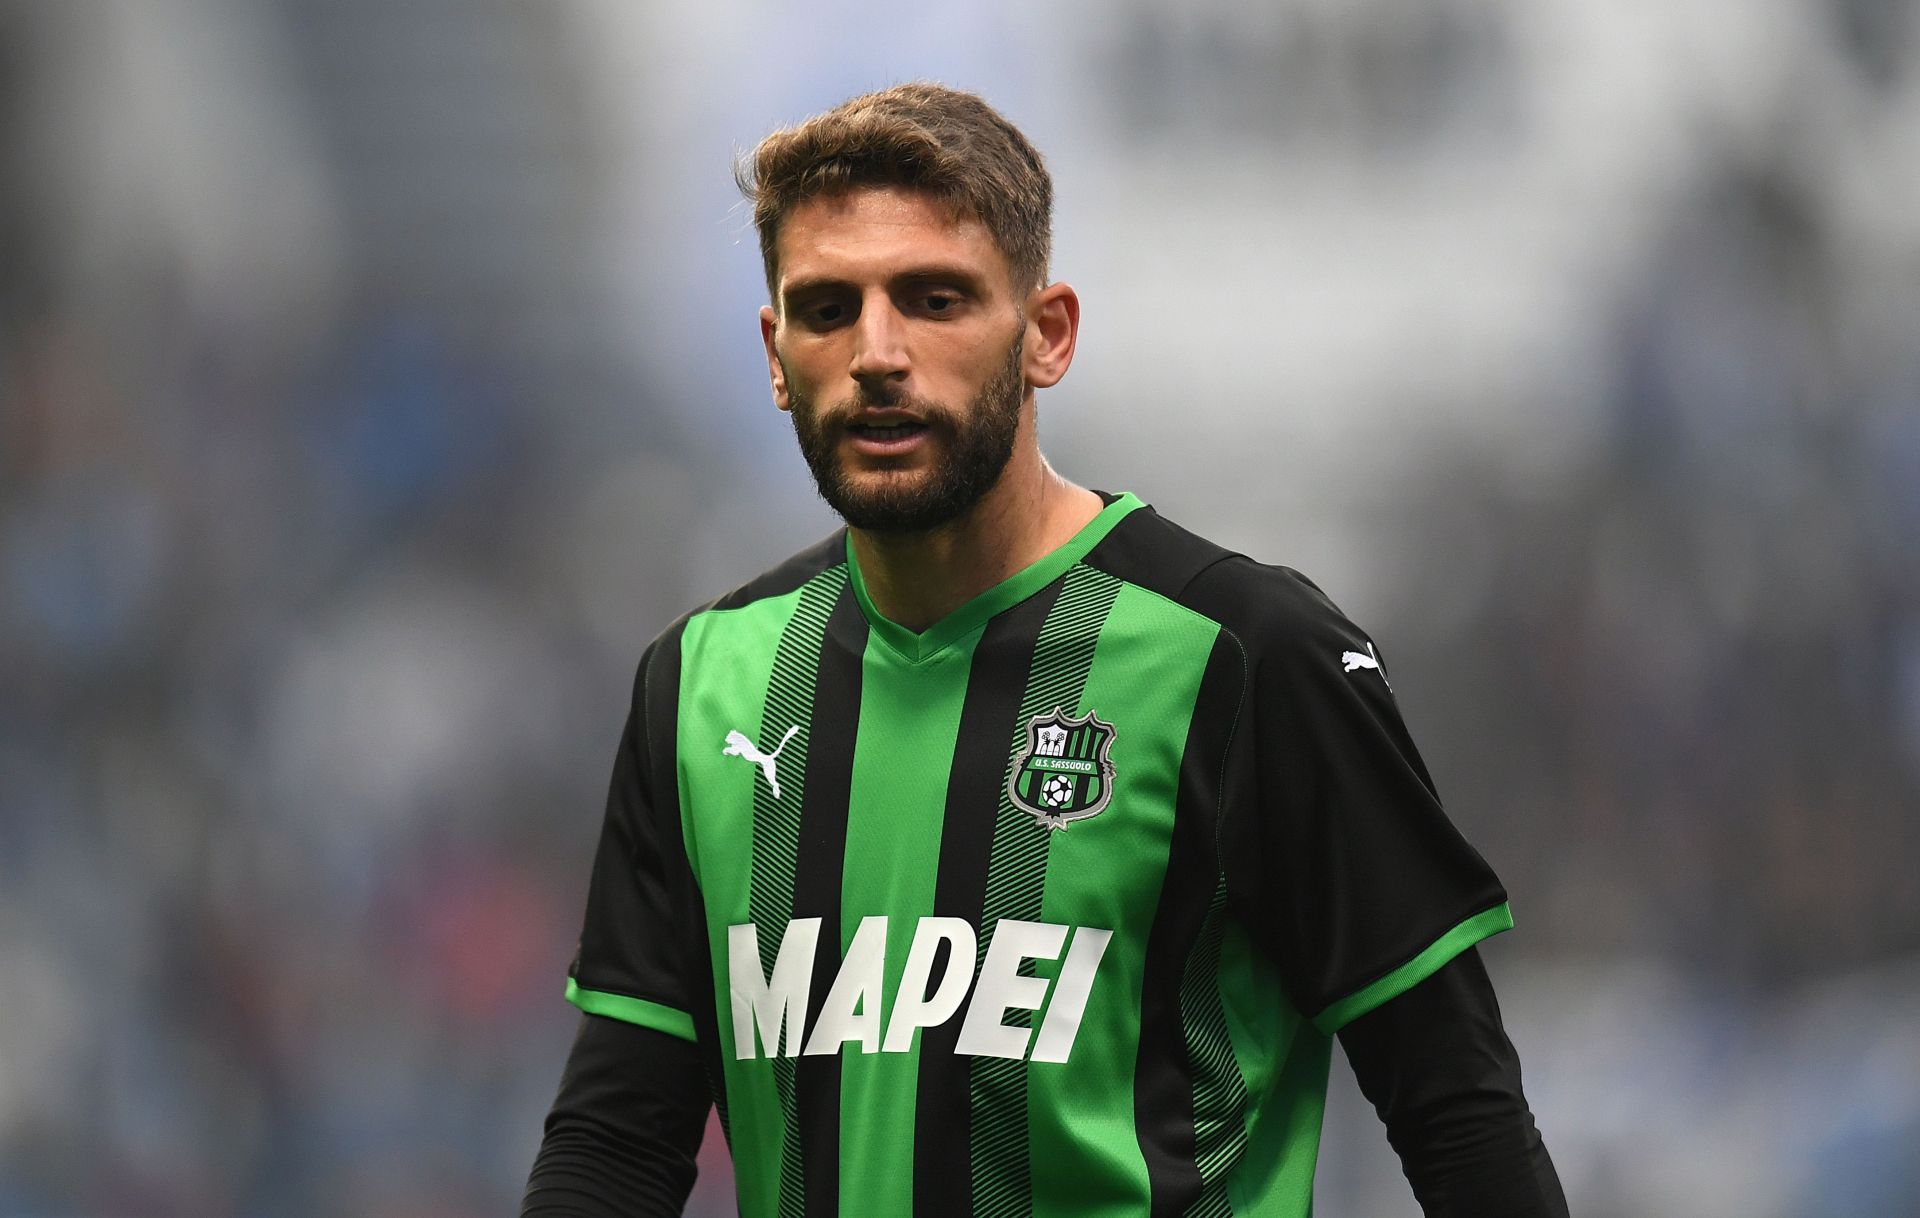 Domenico Berardi has a quick moment of reflection while playing for Sassuolo in Serie A.